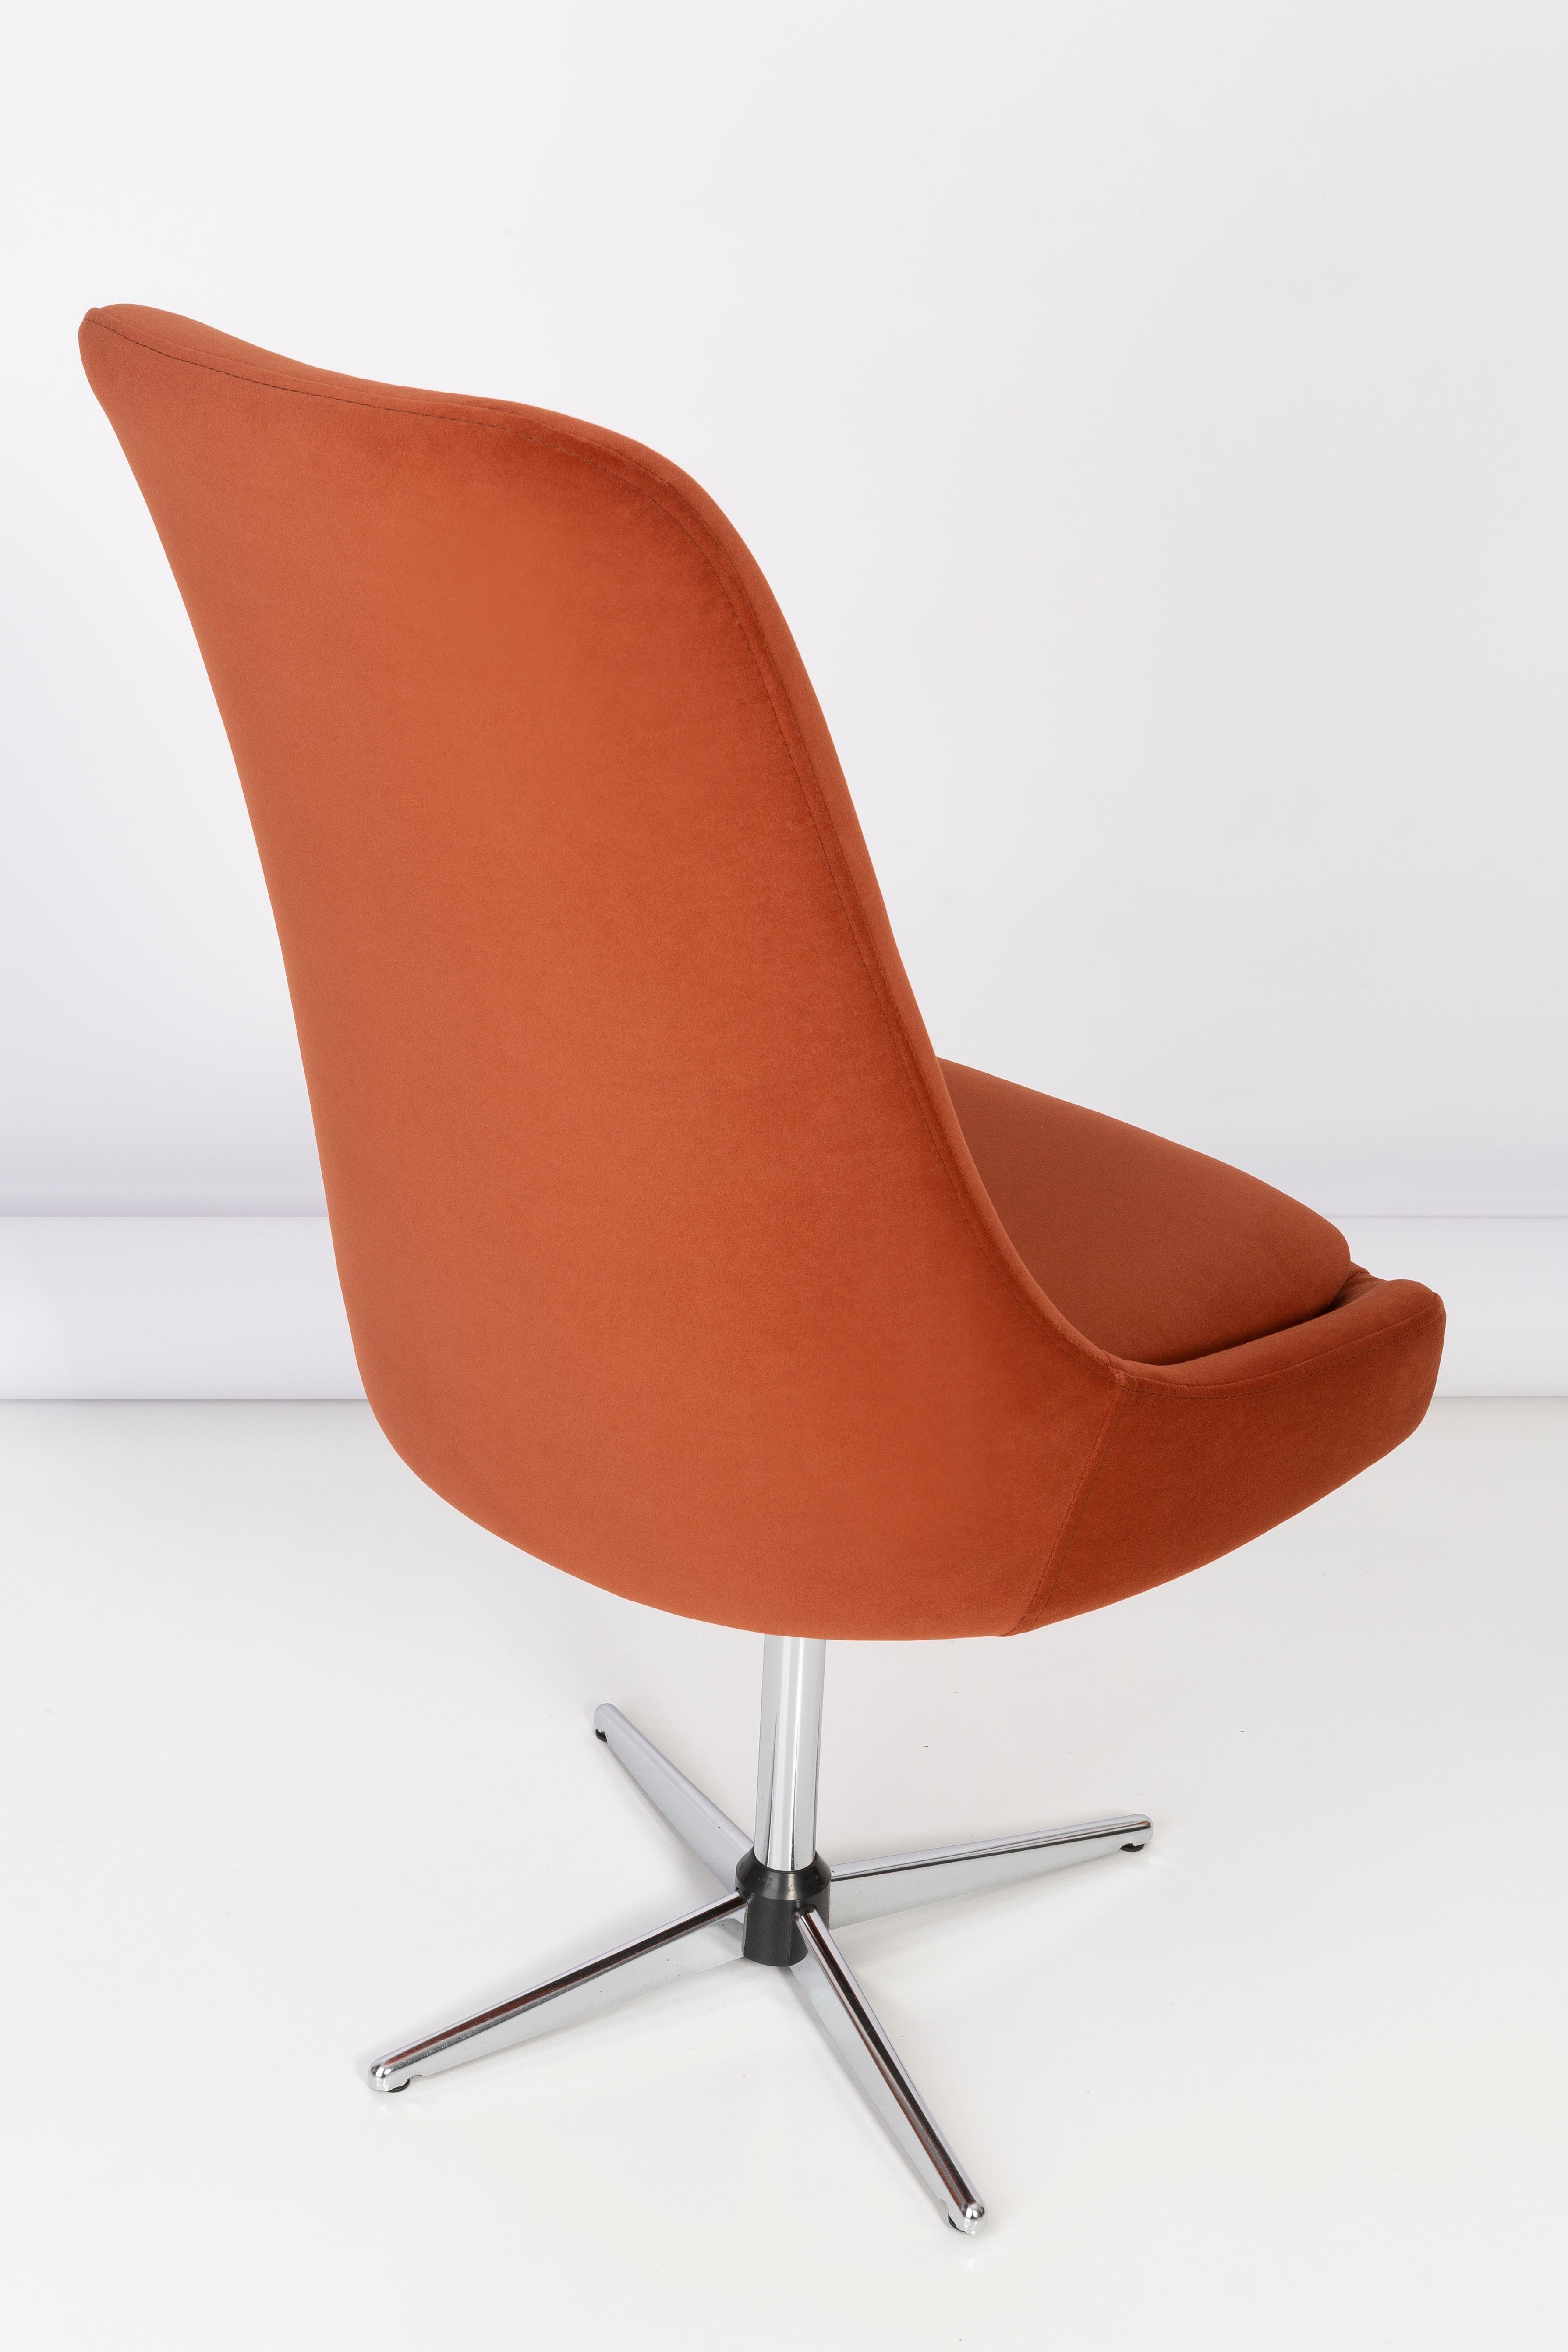 Swivel armchair from the 1960s, produced in the Silesian furniture factory in Swiebodzin, at the moment they are unique. Very comfortable, perfect as a desk chair. Due to their dimensions, they perfectly blend in even in small apartments providing